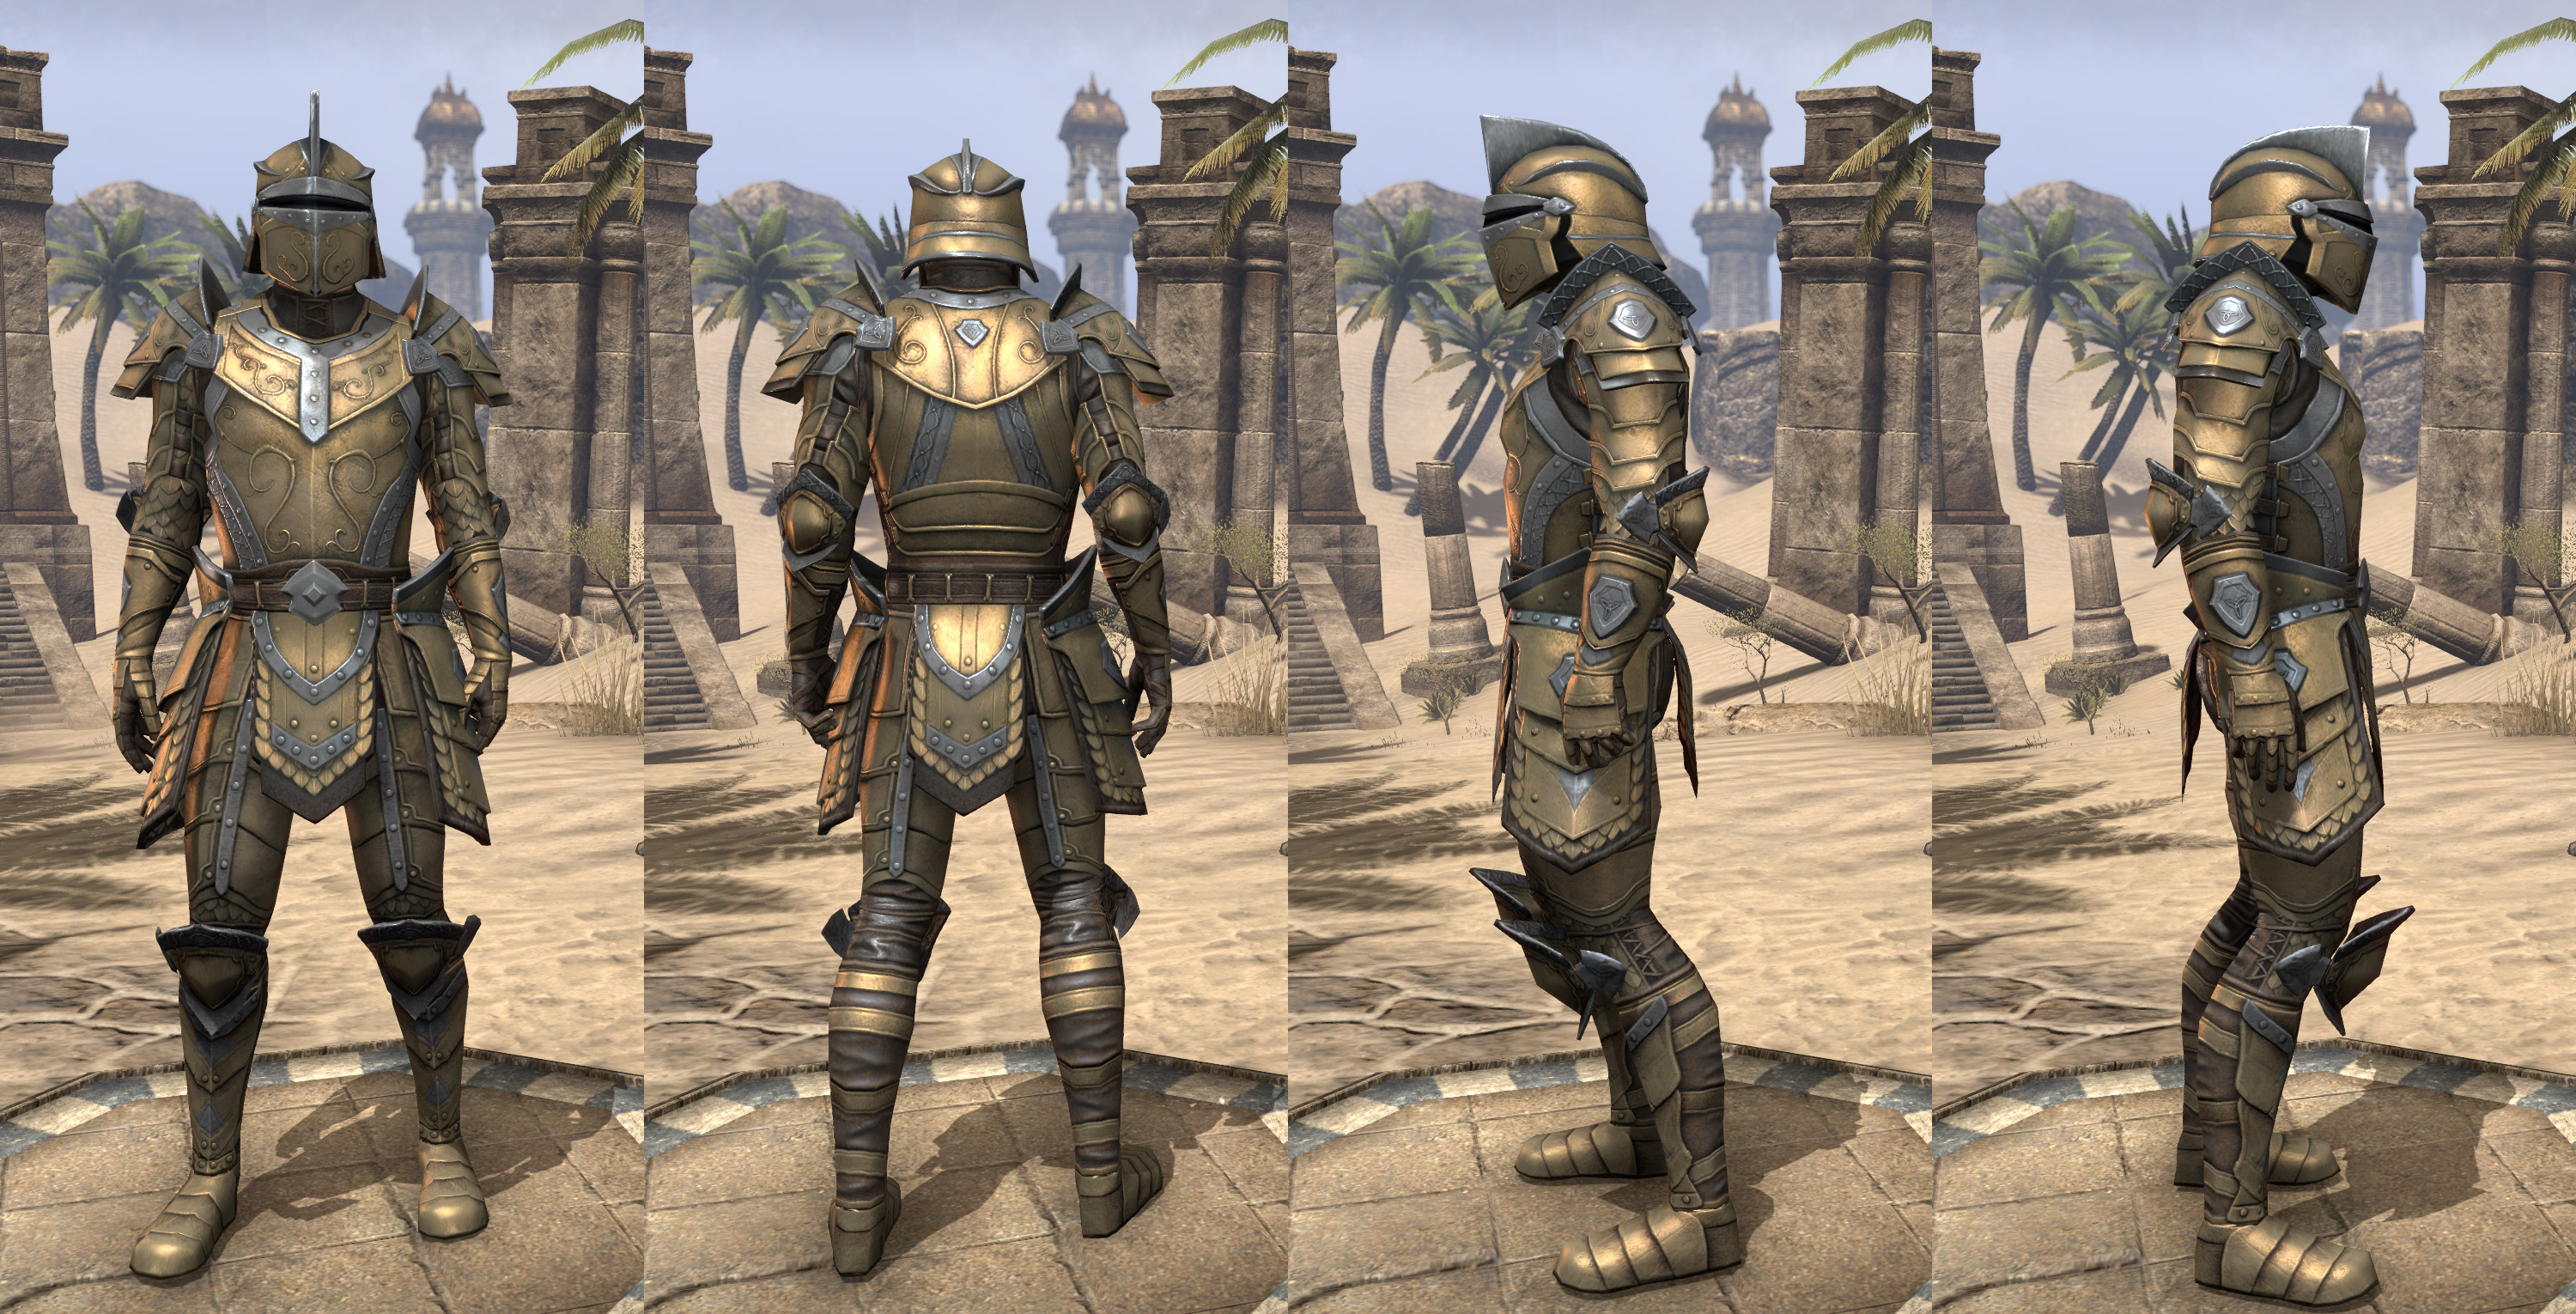 Breton Style is a craftable armor and weapon style in Elder Scrolls Online....